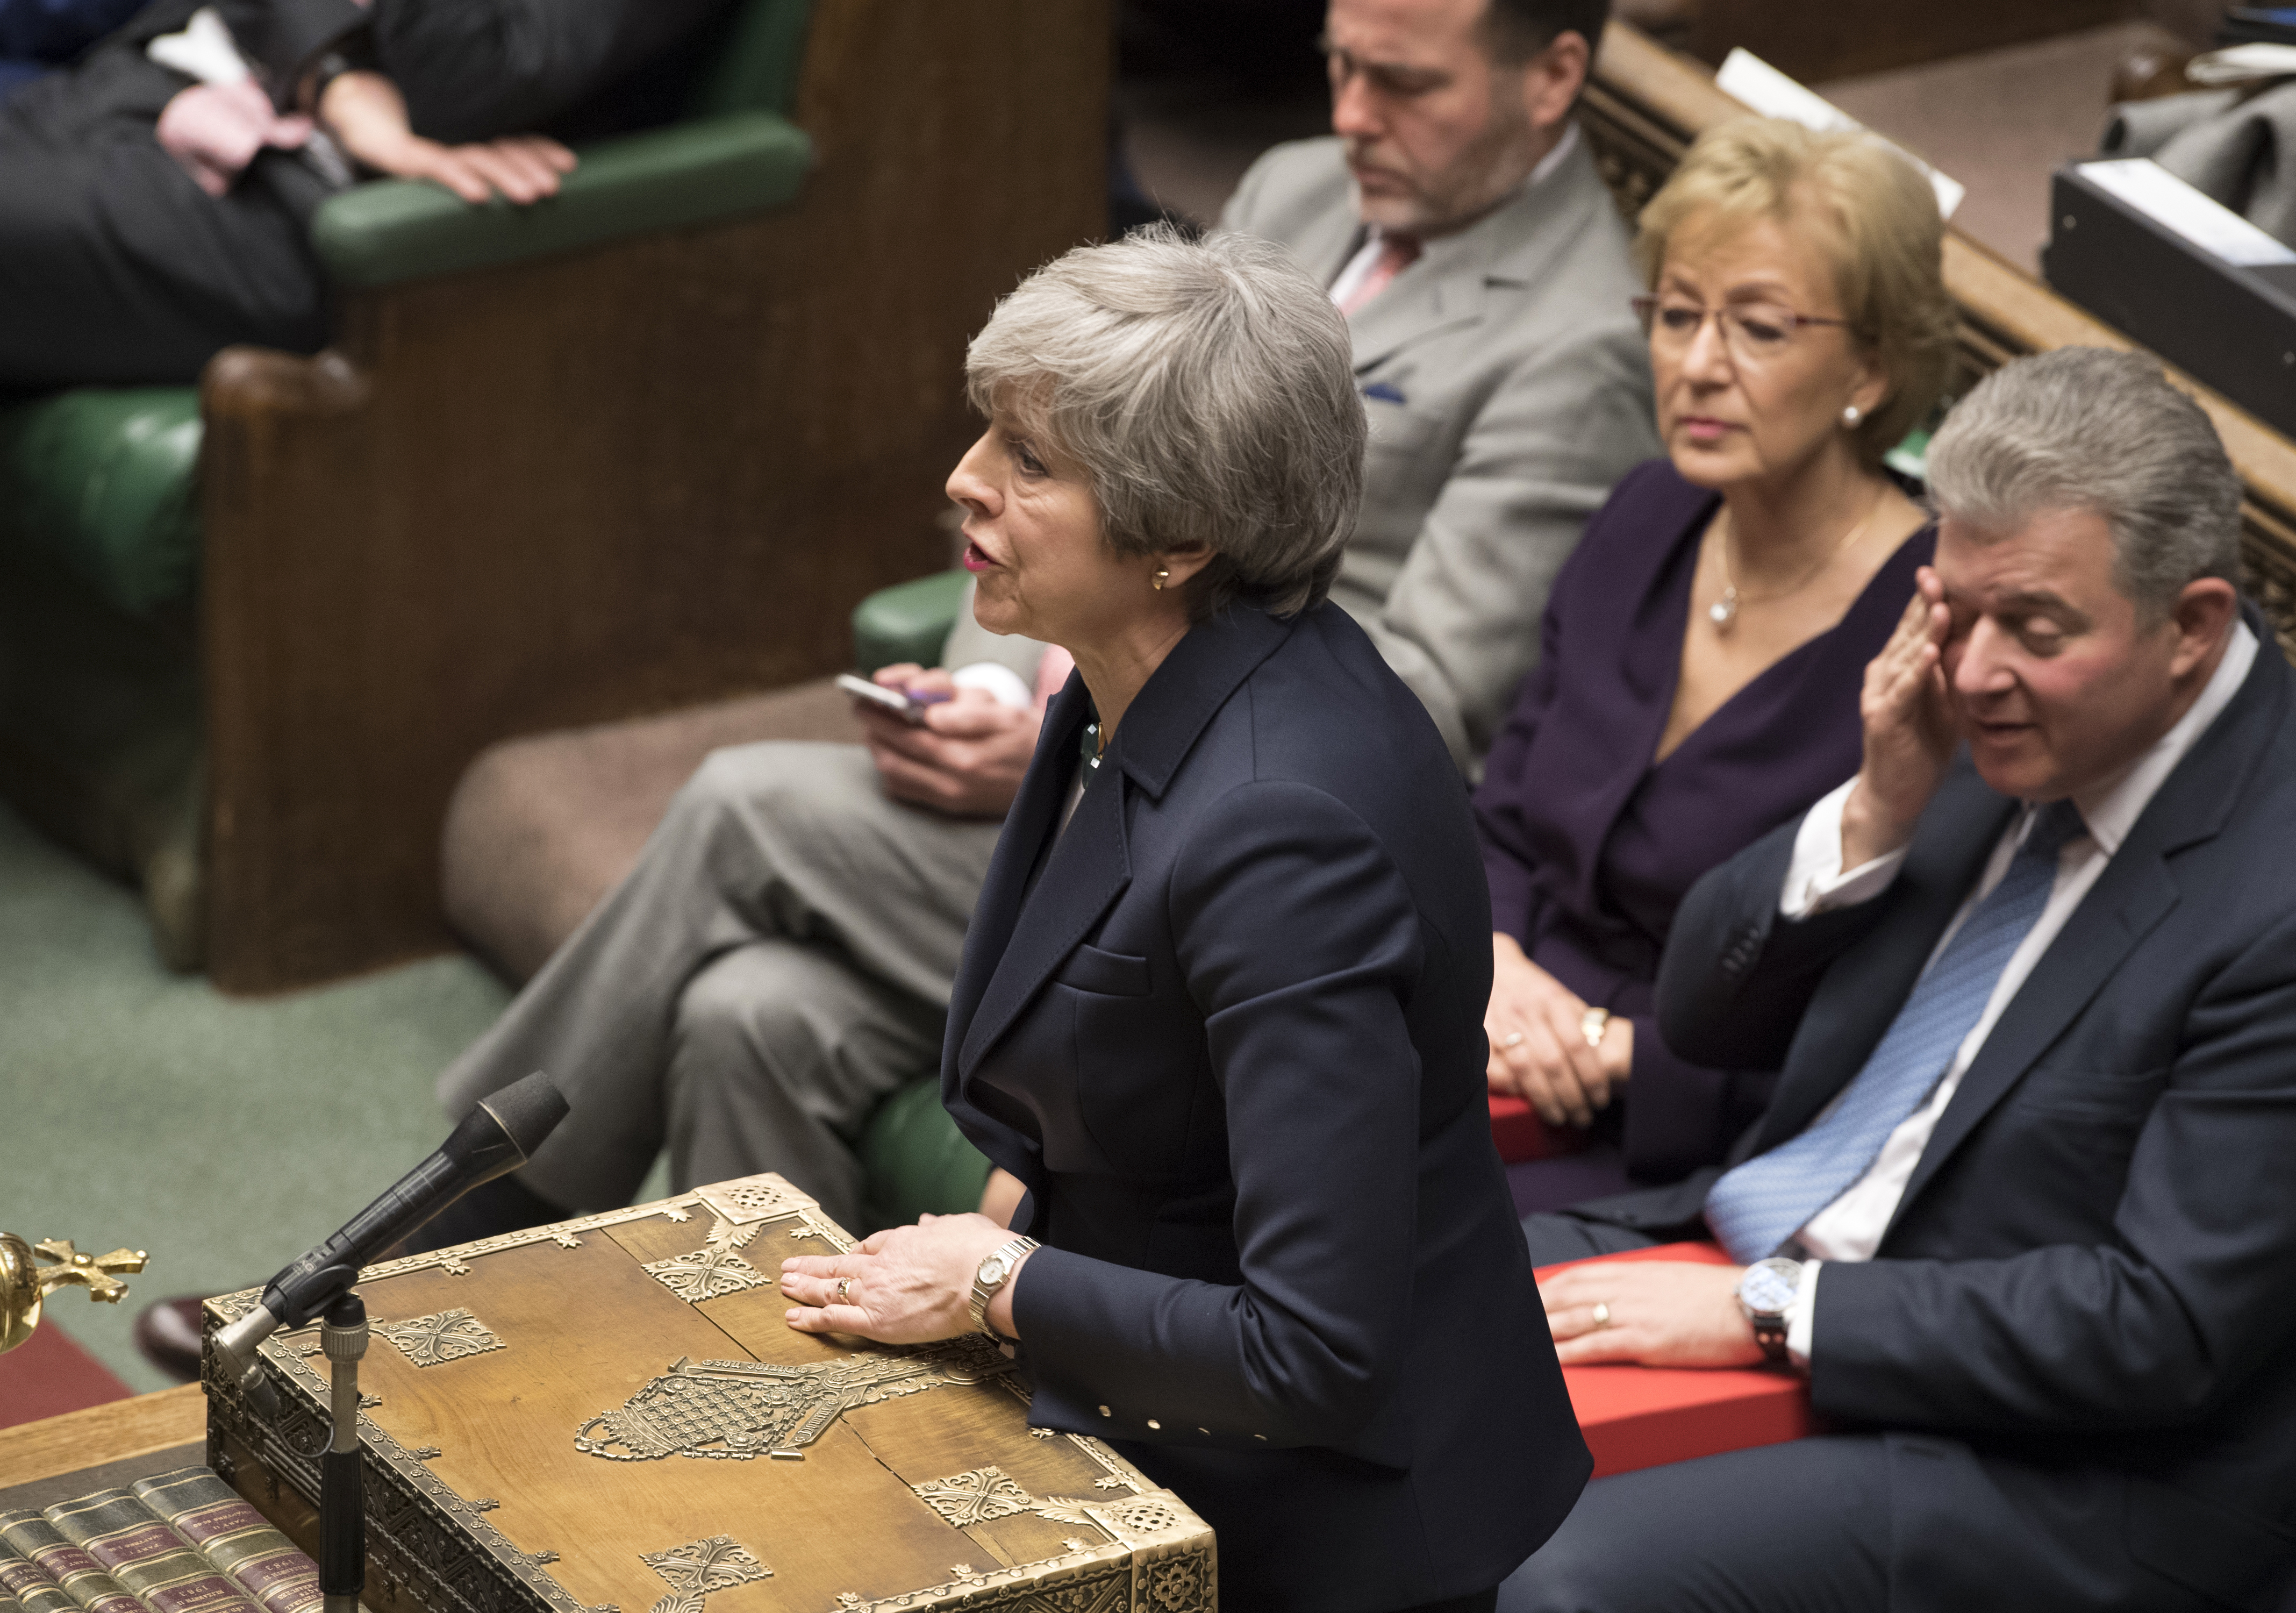 Britain's Prime Minister Theresa May at center right front row, speaks to lawmakers in the House of Commons, London, Wednesday March 13, 2019. Political crisis in Britain is sparking anxiety across the European Union, as fears rise that Britain will crash out of the bloc on March 29 without a withdrawal agreement to smooth the way. (Mark Duffy/UK Parliament via AP)